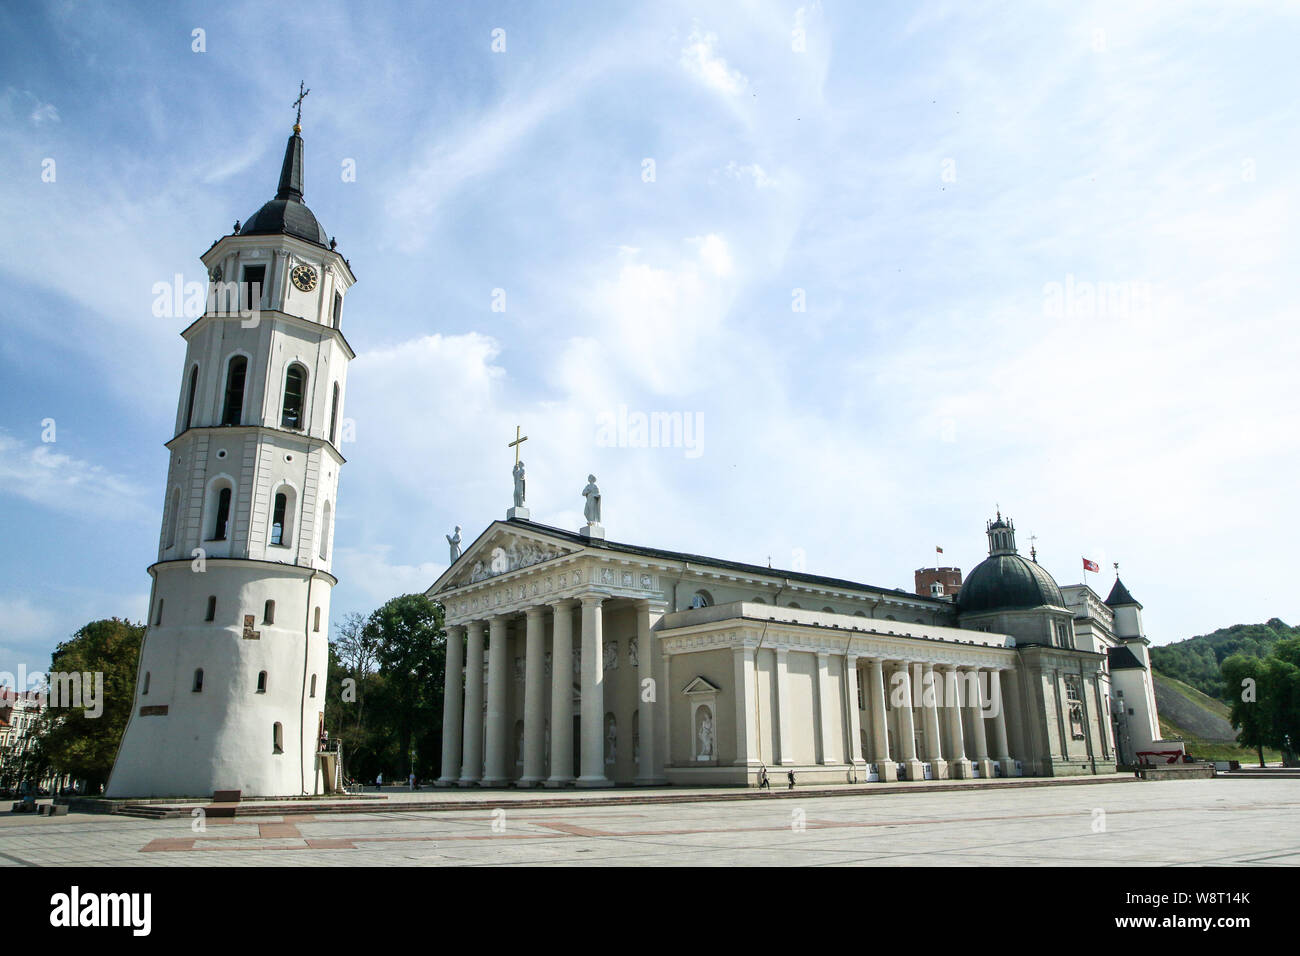 The 'Vilniaus katedra', the Vilnius cathedral in Lithuania. One of the main sights of the country. Stock Photo